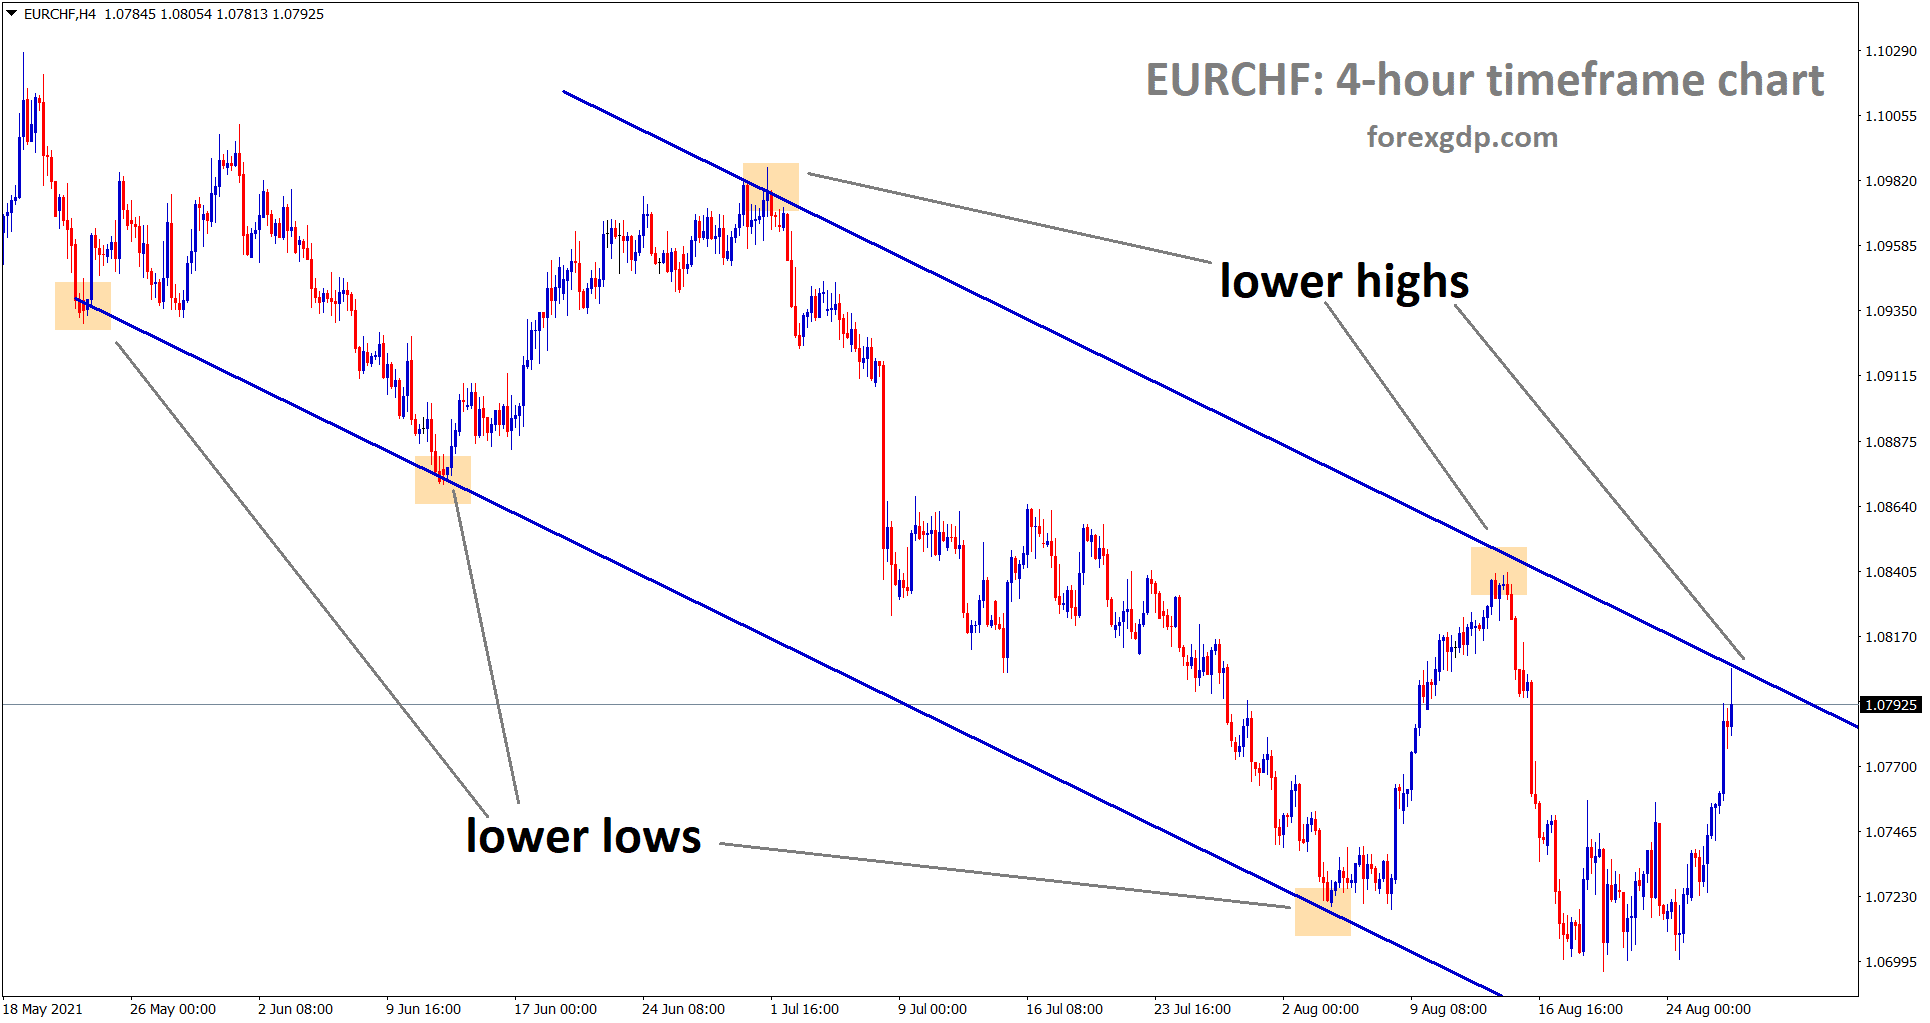 EURCHF is moving in a downtrend now the market has reached the lower high wait for the breakout or reversal